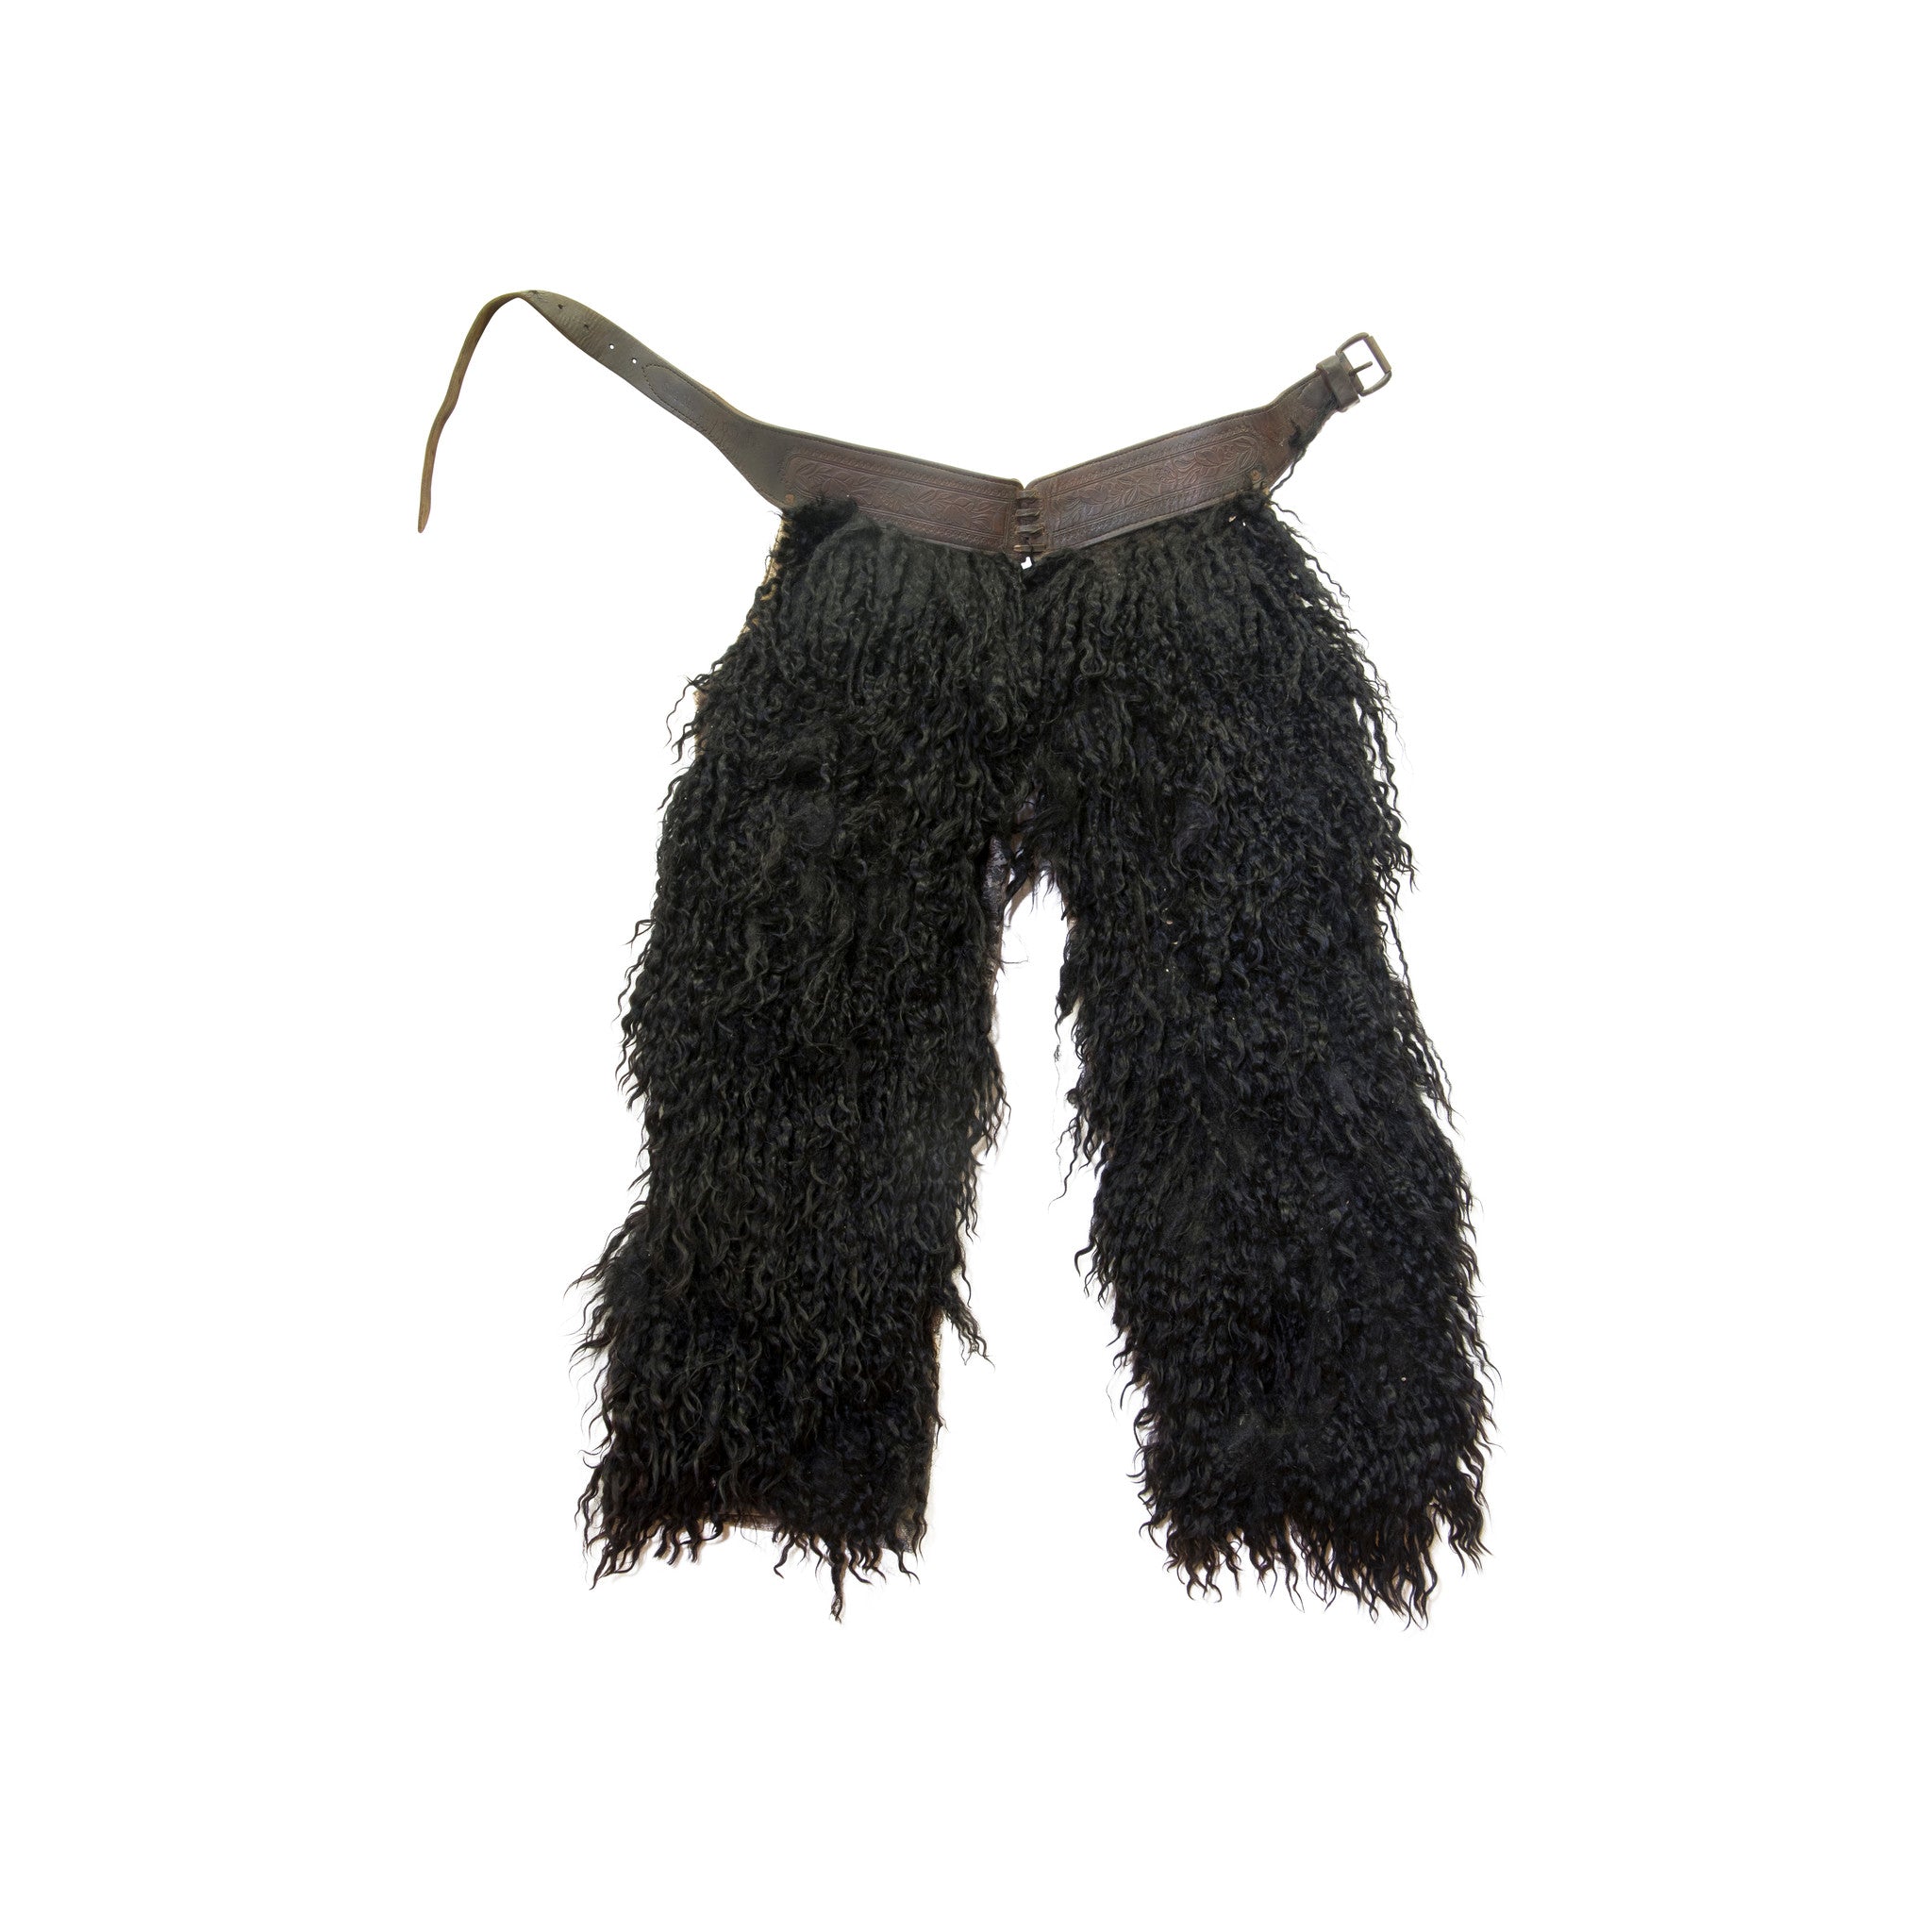 Black Wooly Chaps, Western, Garment, Chaps